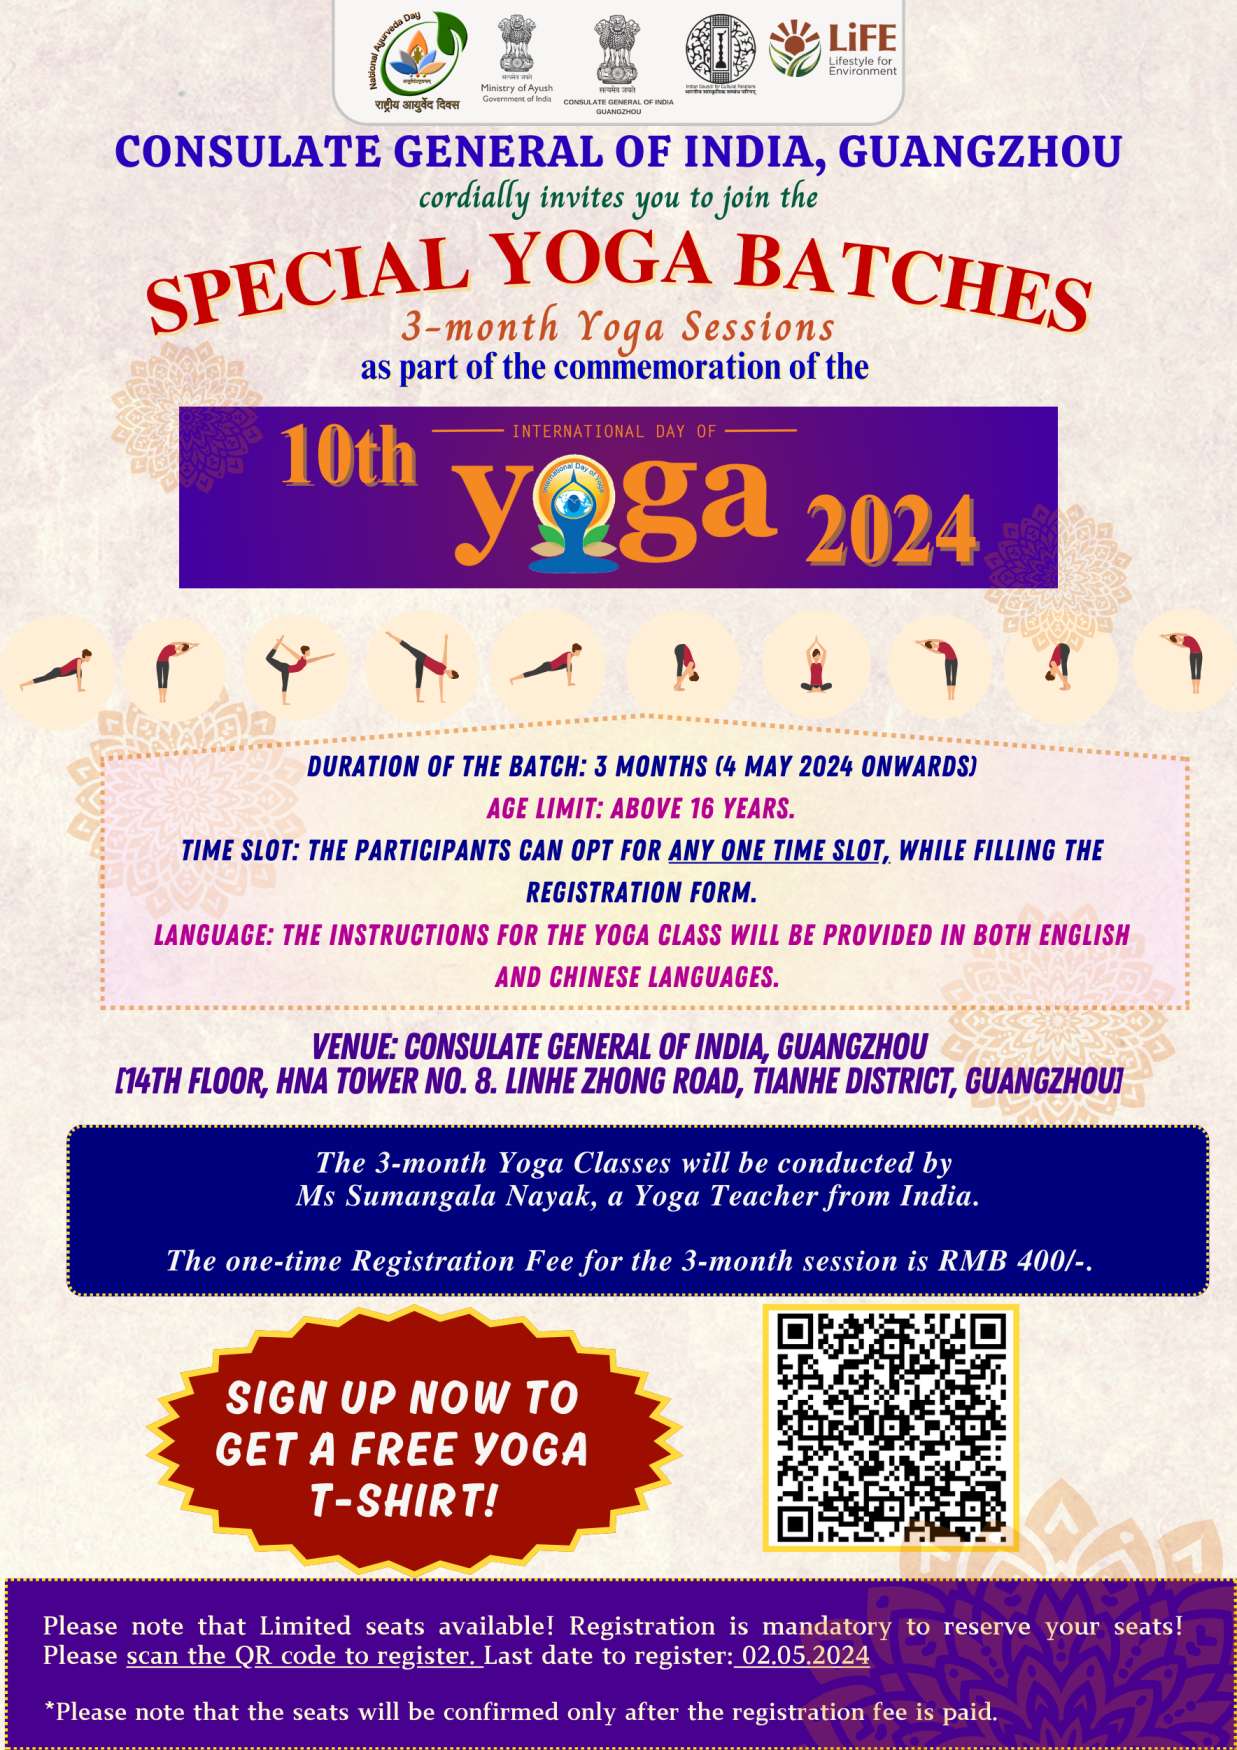 Invitation to attend the ‘Special Yoga Batches’ as part of the commemoration of the 10th International Day of Yoga, starting from 4 May 2024 (Saturday).